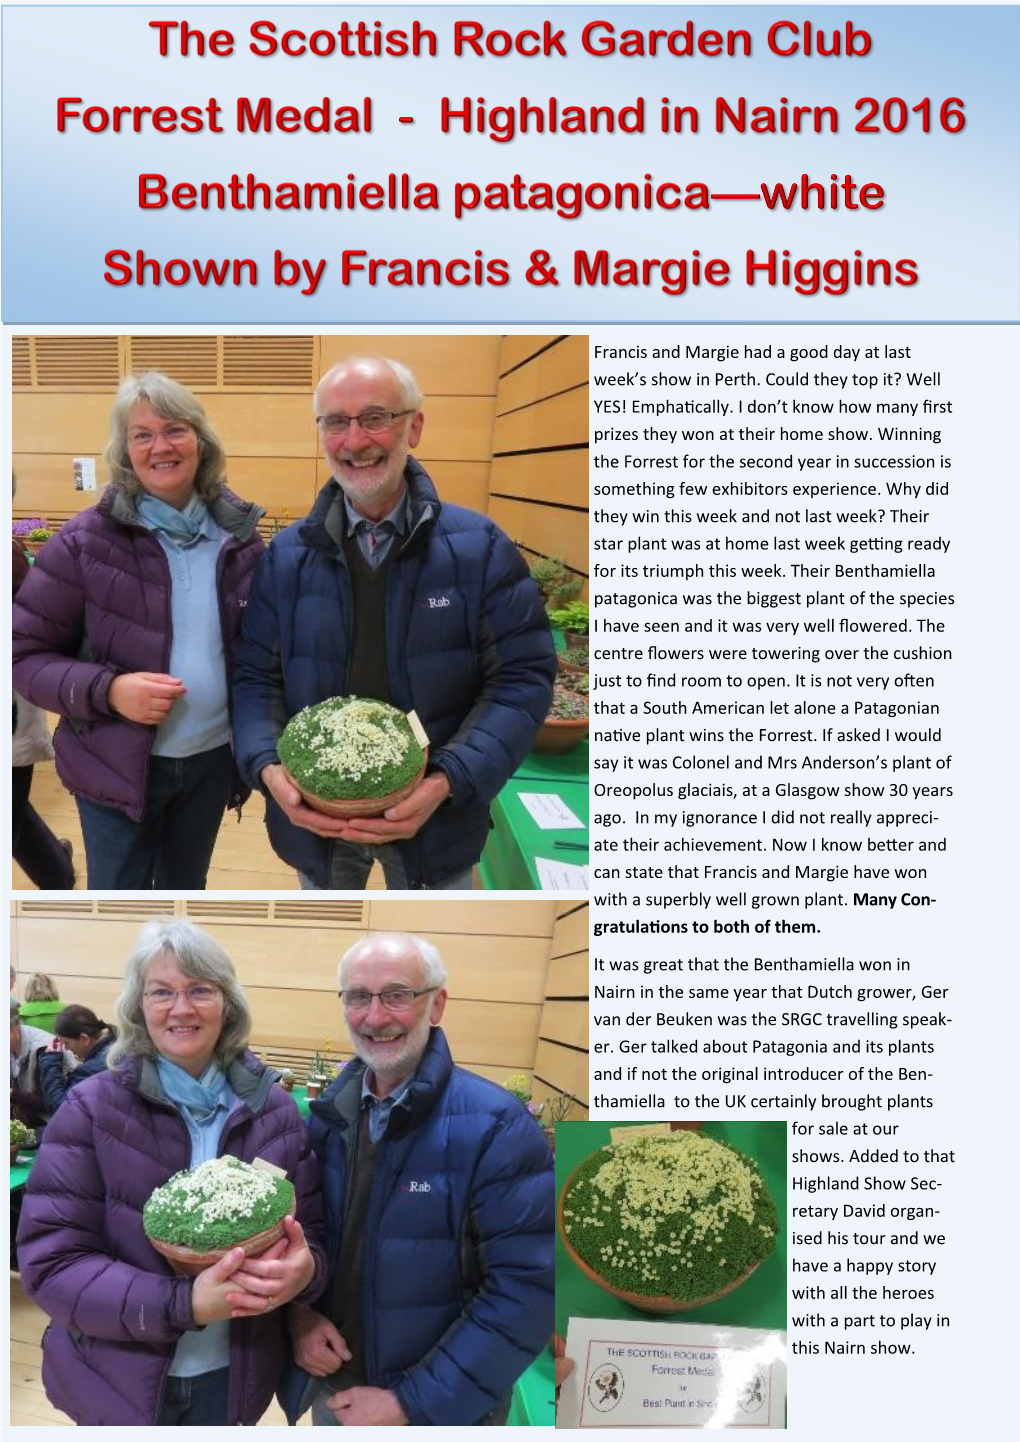 Francis and Margie Had a Good Day at Last Week's Show in Perth. Could They Top It? Well YES! Emphatically. I Don't Know